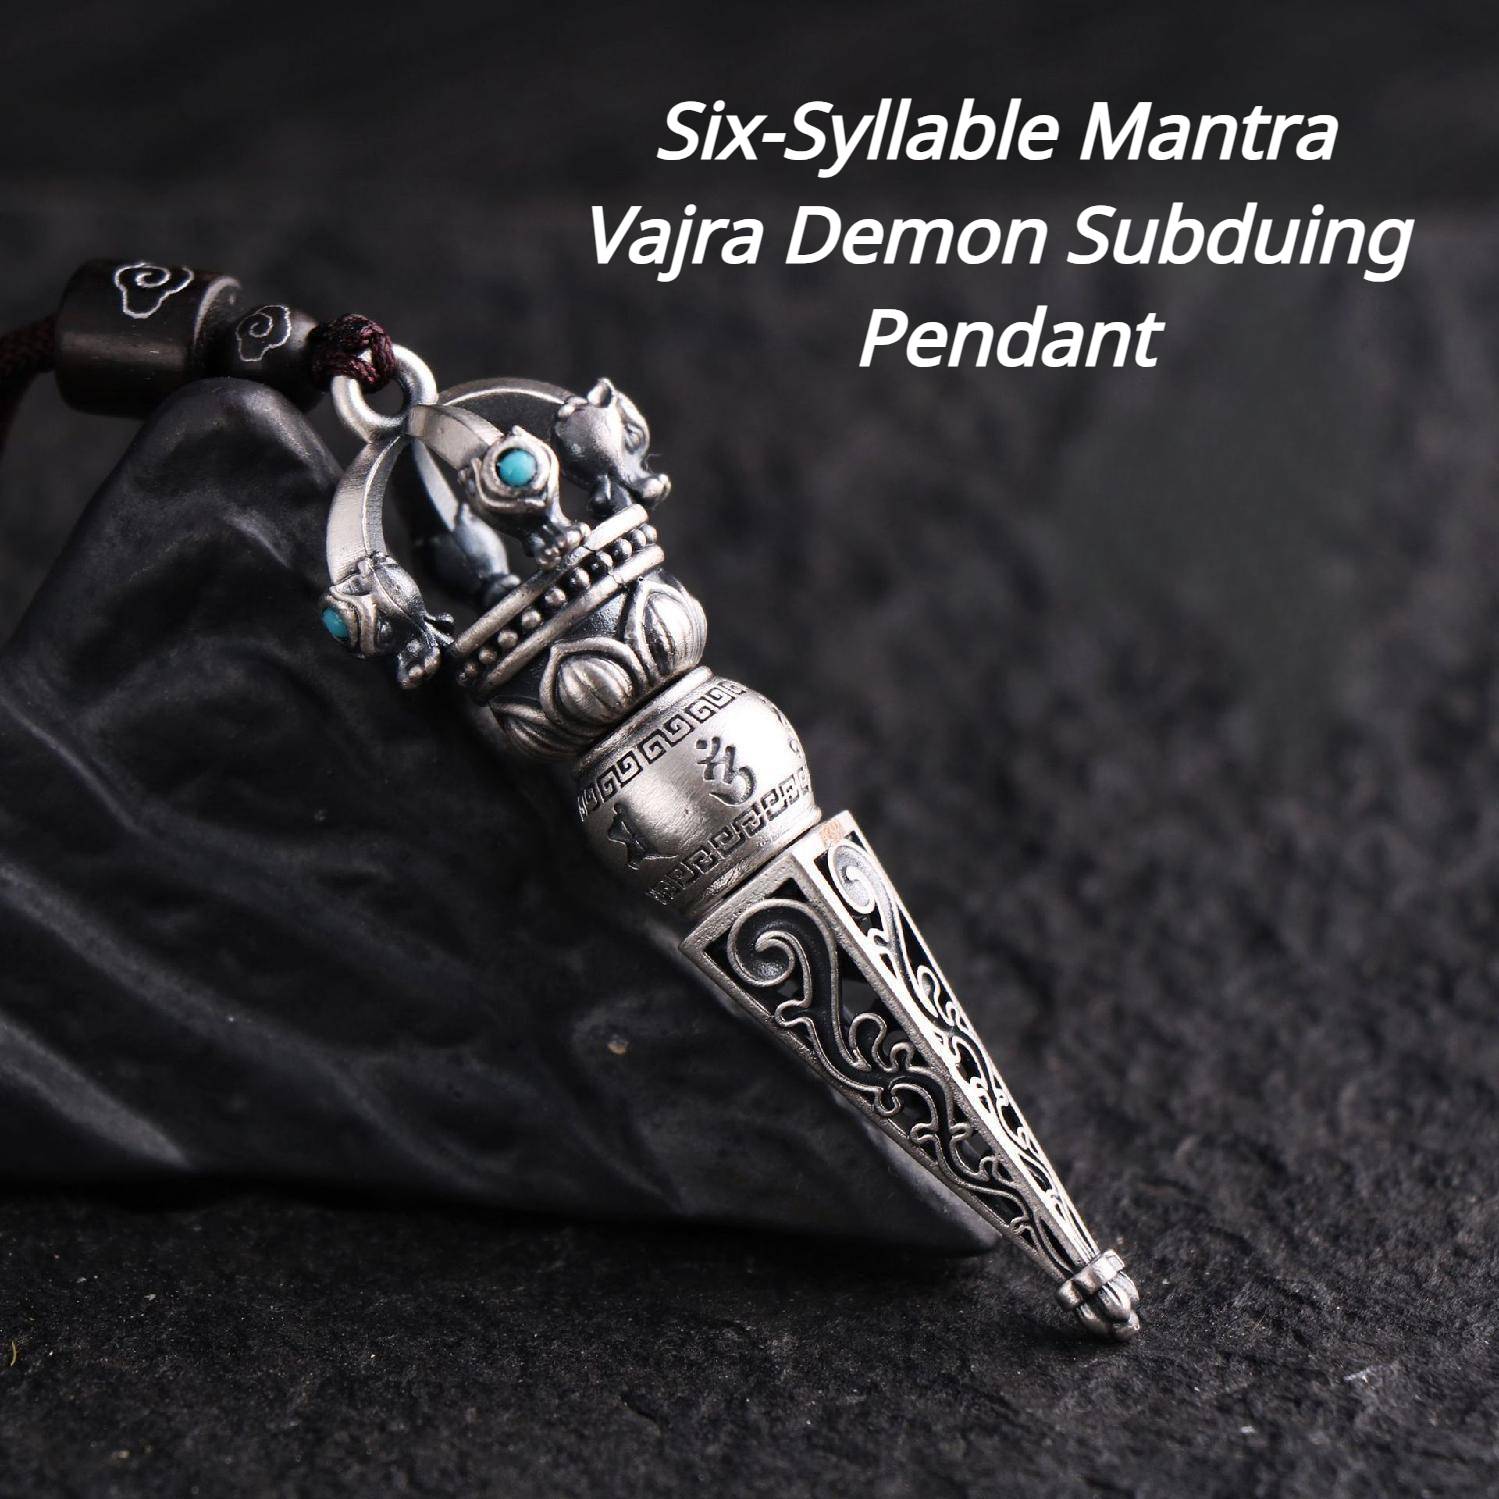 Six-Syllable Mantra Vajra Demon Subduing Pendant for good luck, protection, Buddhist Guardian, wealth, and health3